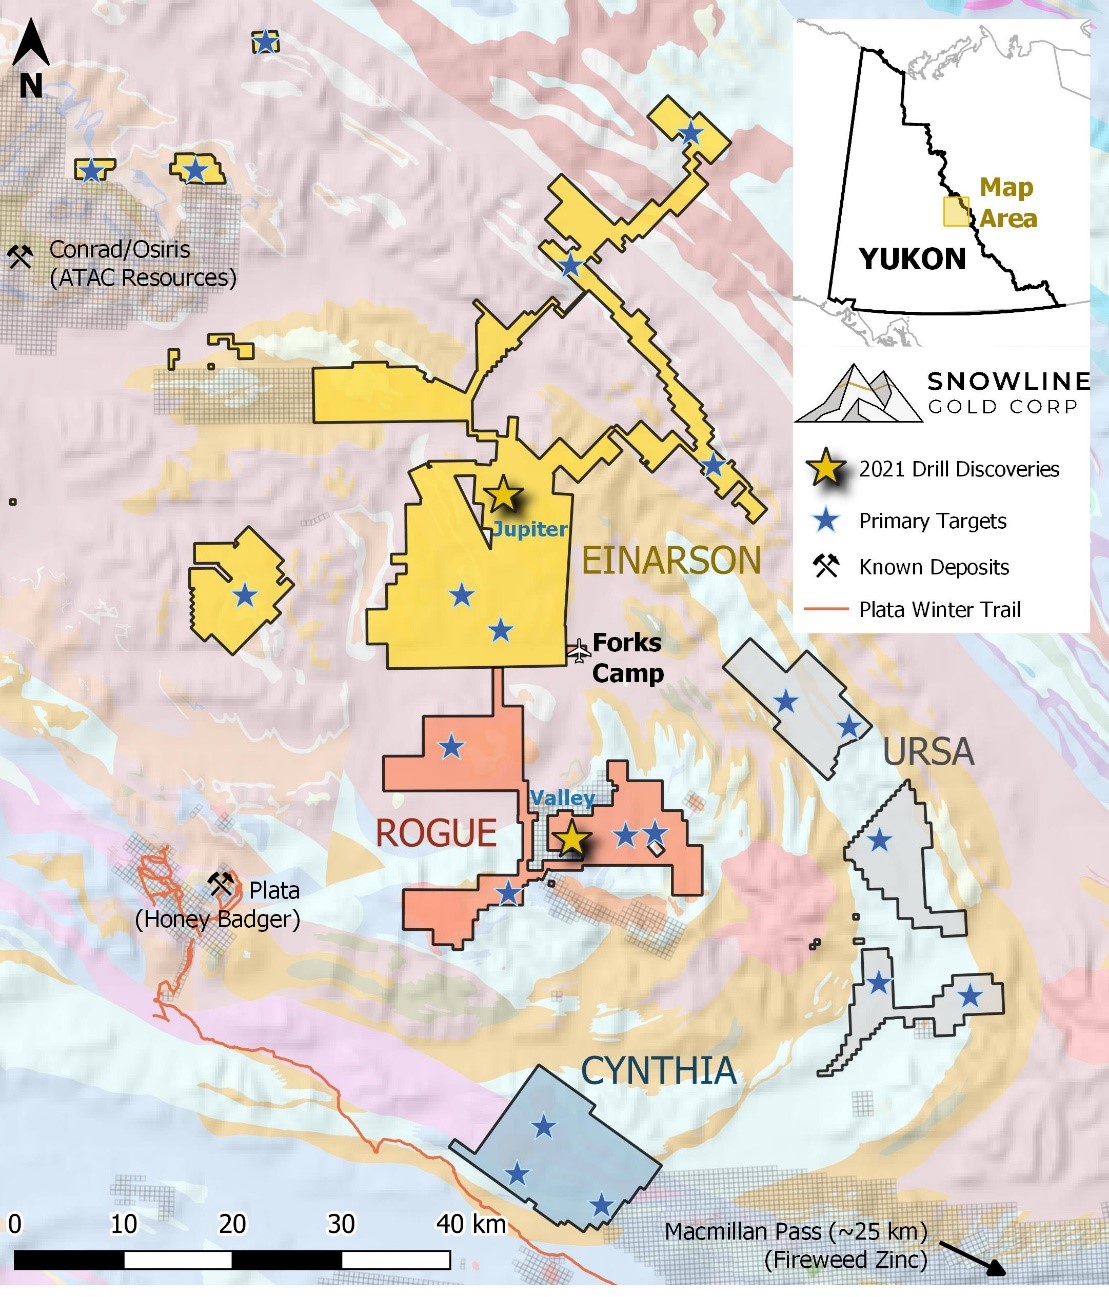 Snowline Gold Corp., Wednesday, May 25, 2022, Press release picture